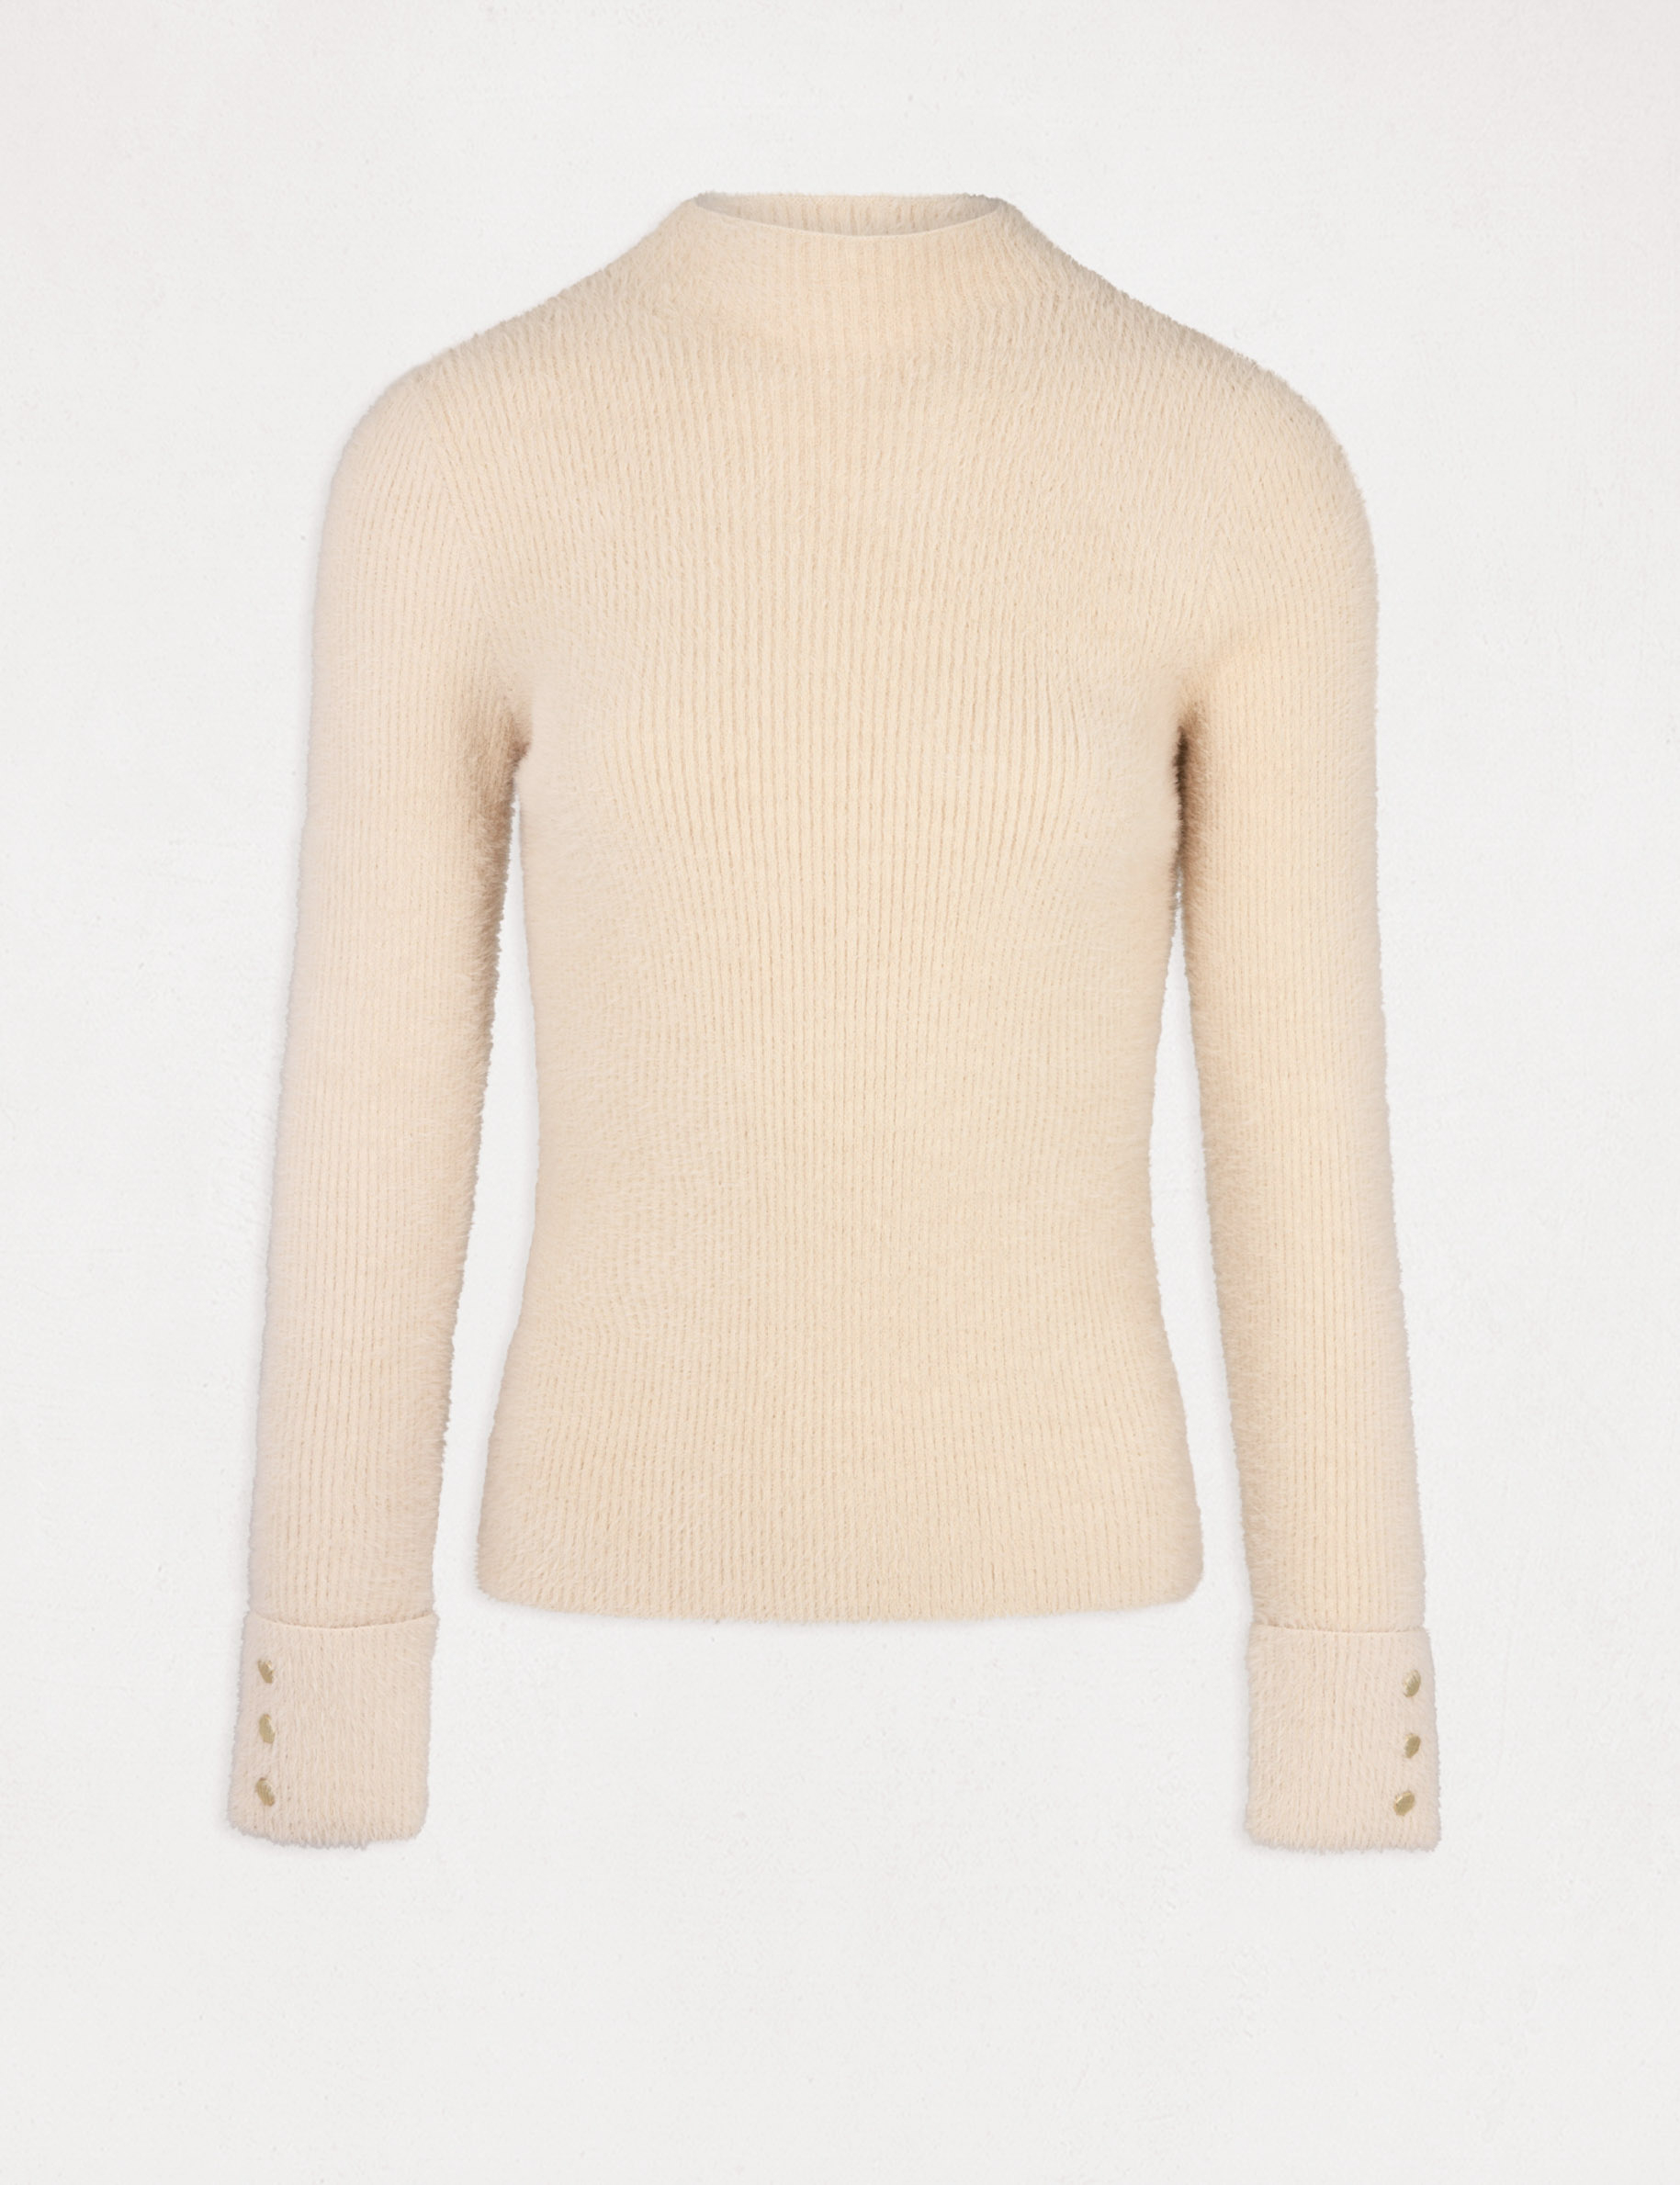 Messina Hembry Clothing Ltd Vintage Chaps Size M Flecked Button Neck Jumper  Sweater in Beige - ShopStyle Knitwear